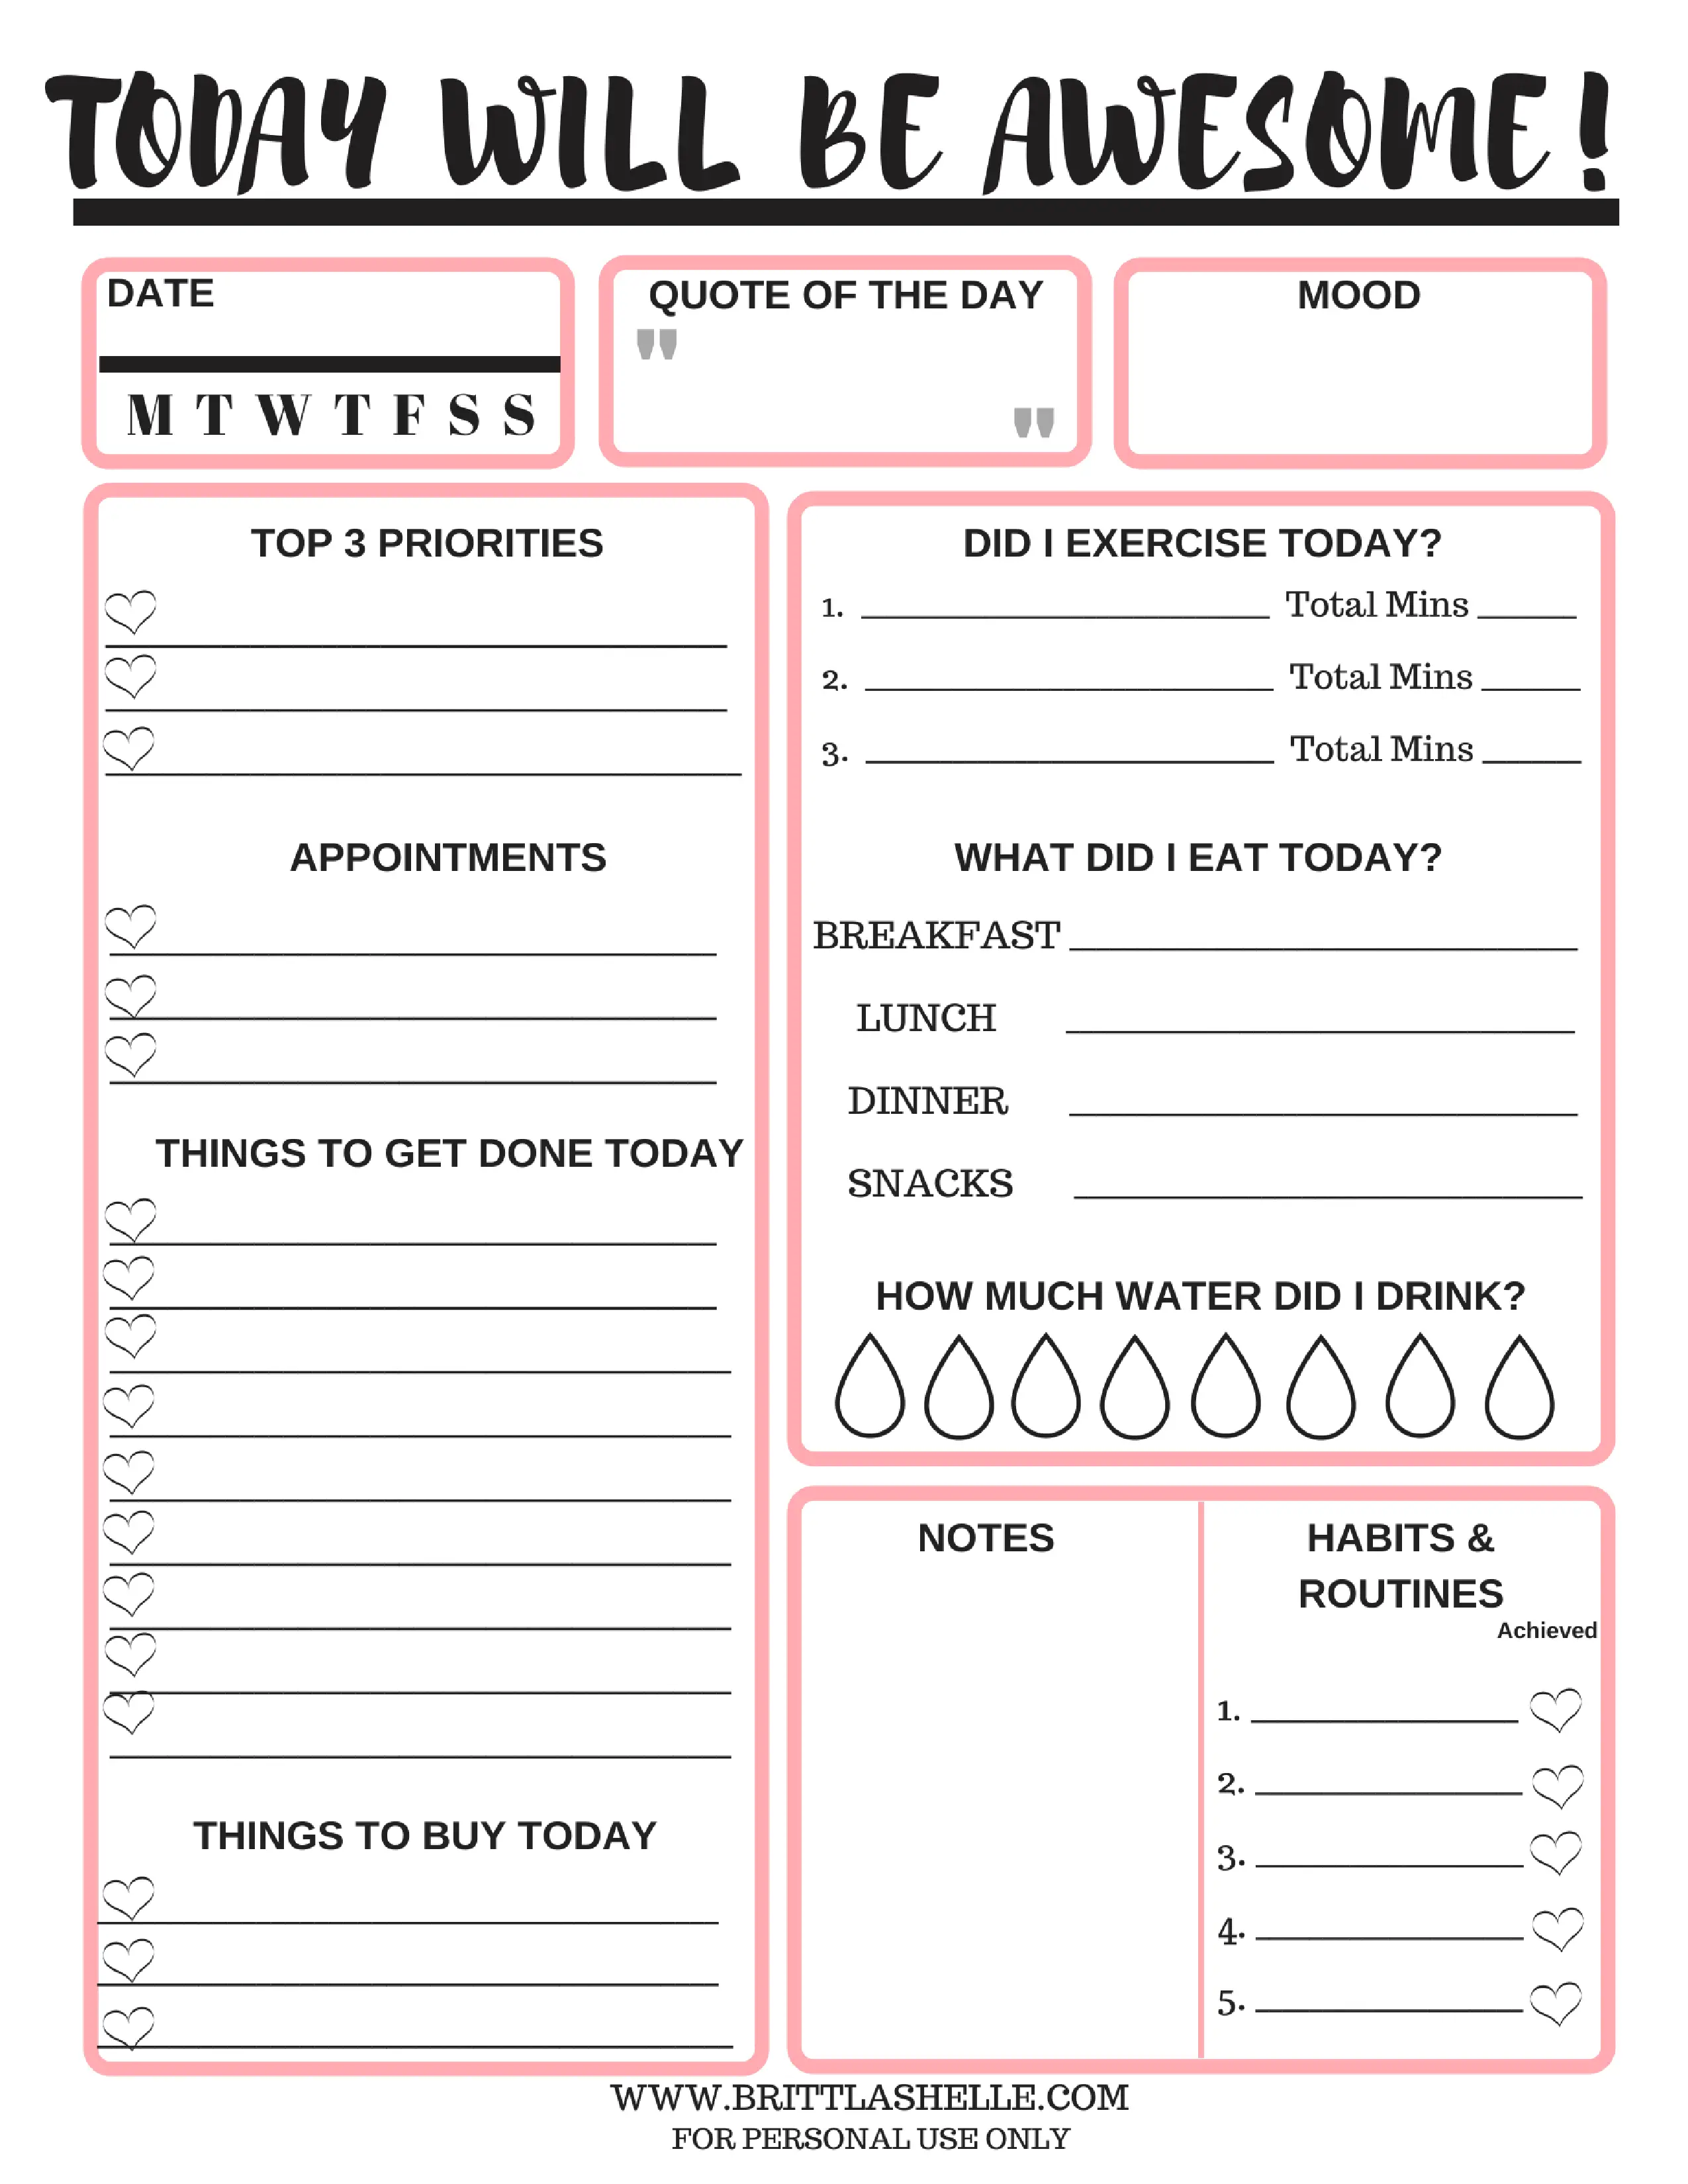 goal-setting-worksheet-for-young-adults